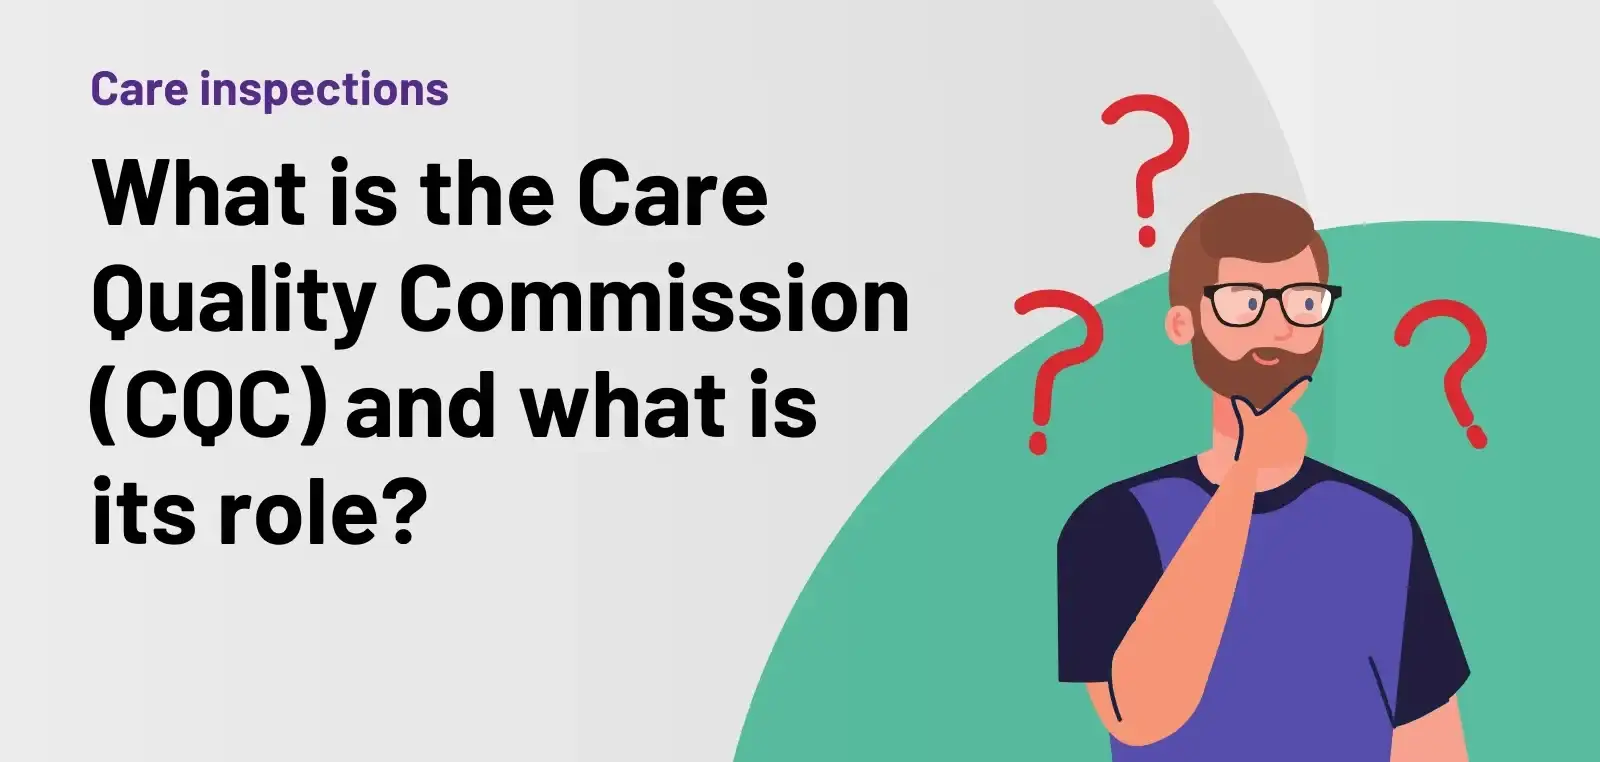 What is the Care Quality Commission (CQC) and what is its role?